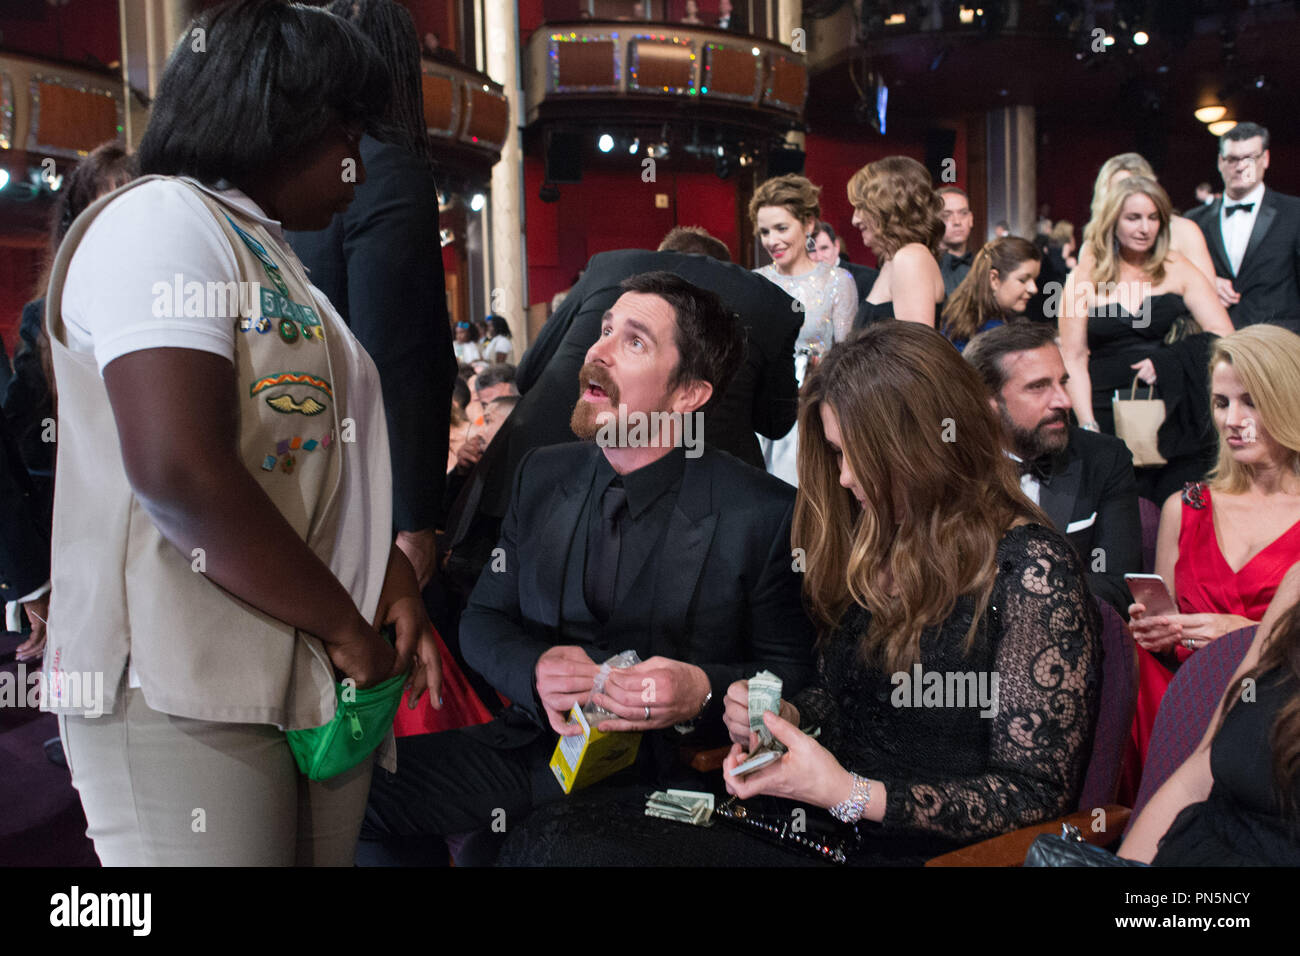 Oscar®-nominee Christian Bale and Sibi Blazic buy Girl Scout Cookies during the live ABC Telecast of The 88th Oscars® at the Dolby® Theatre in Hollywood, CA on Sunday, February 28, 2016.  File Reference # 32854 753THA  For Editorial Use Only -  All Rights Reserved Stock Photo